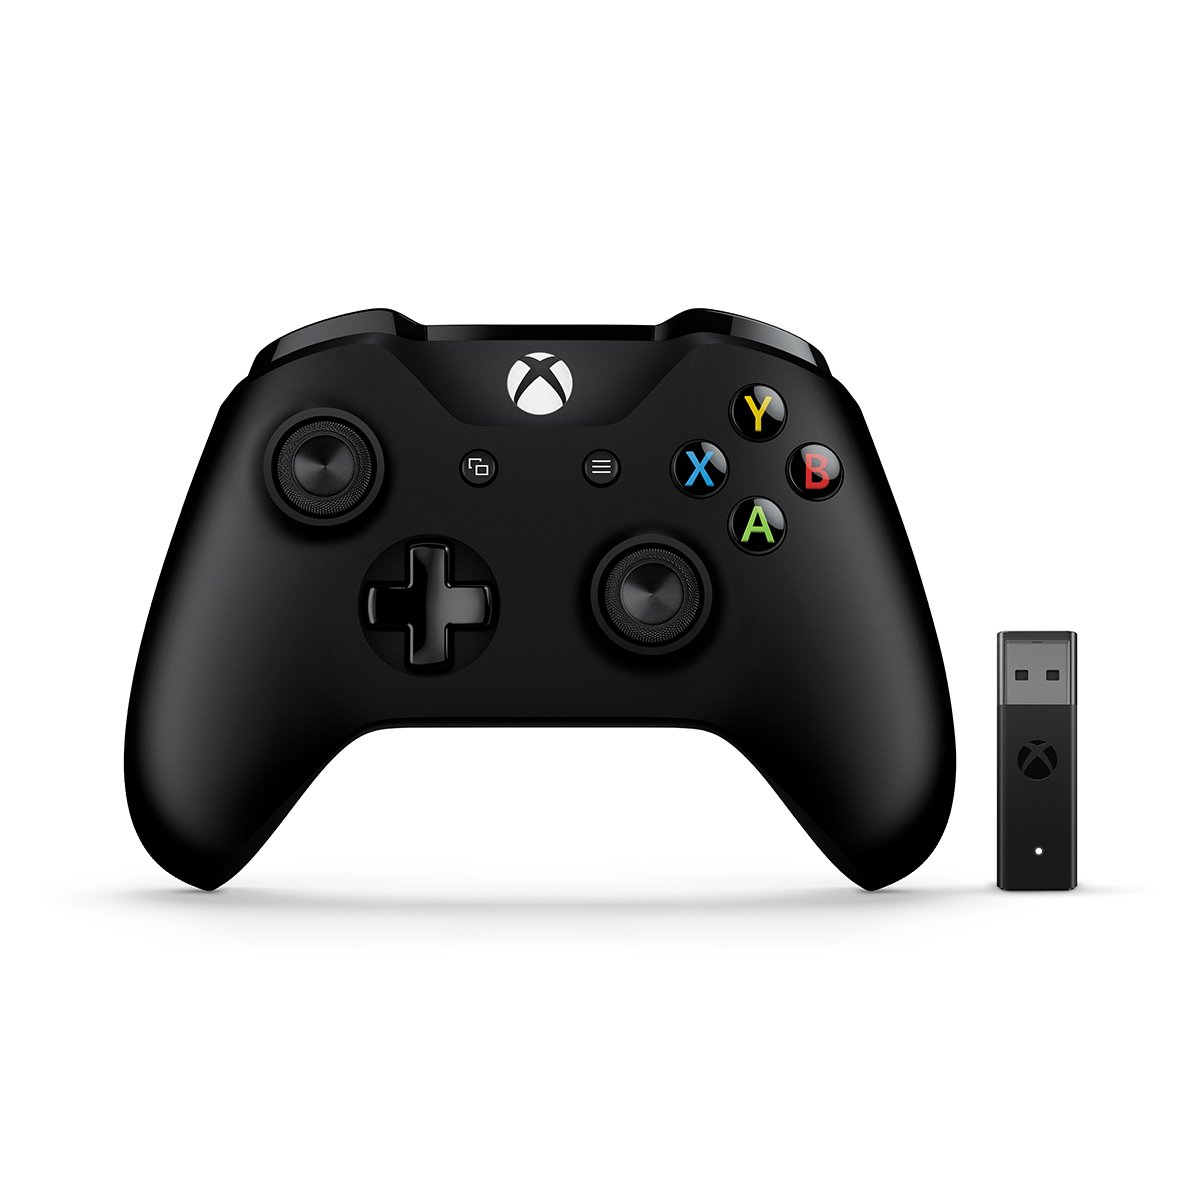 Xbox One controller connected to a Windows PC